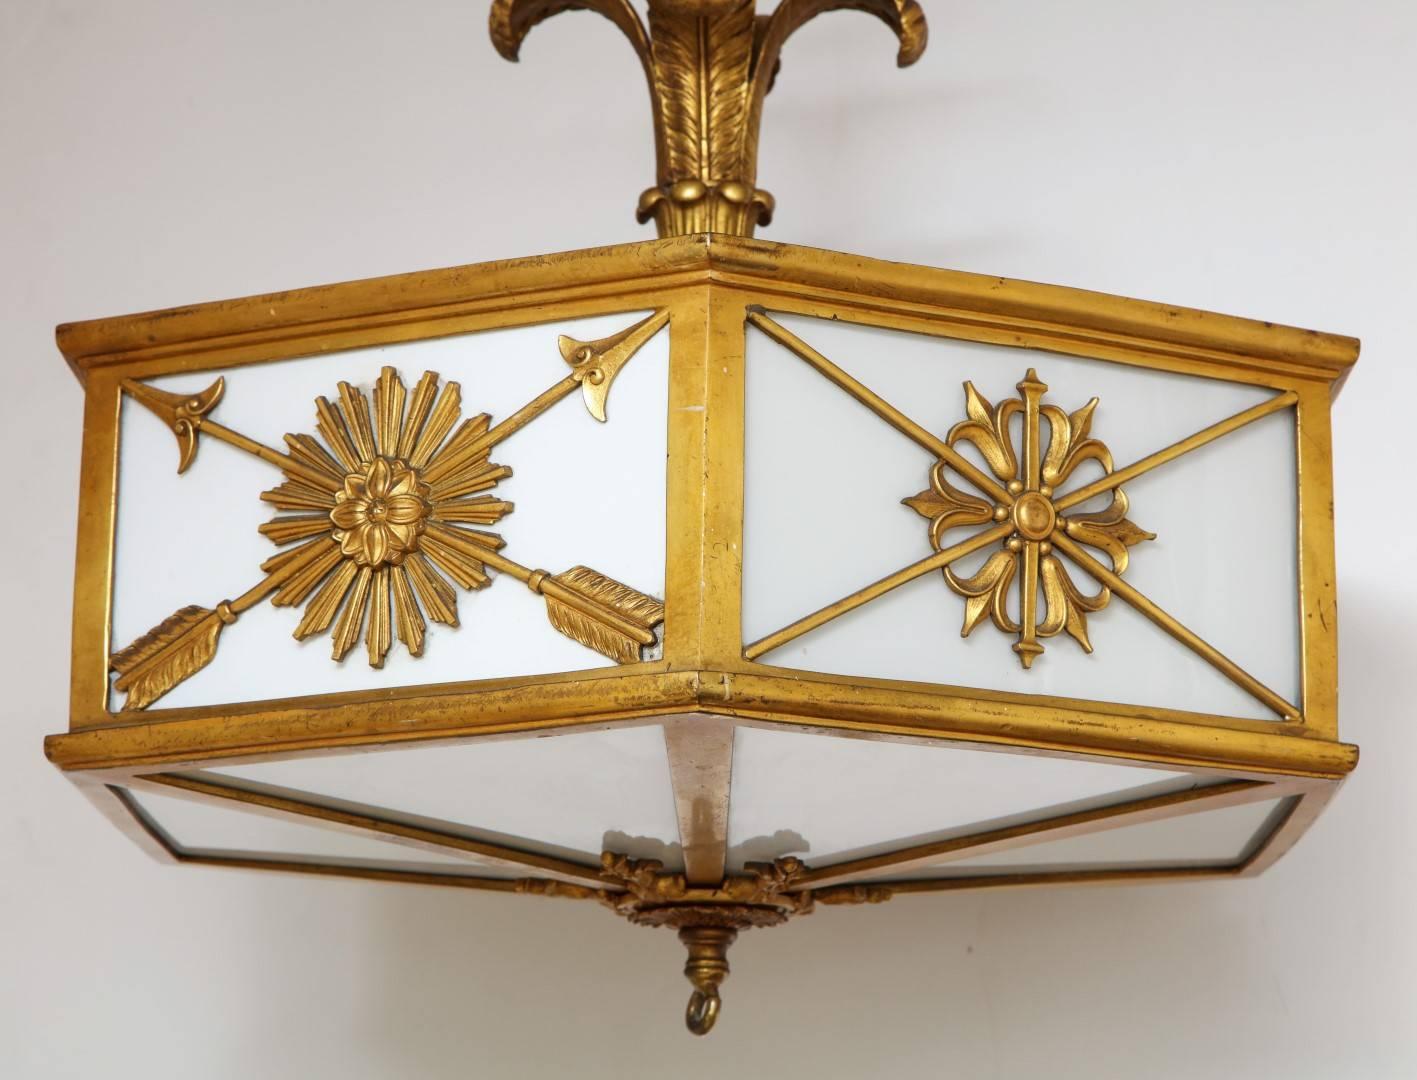 A brass-mounted ceiling, the hexagonal gilt-brass frame with reserves depicting neoclassical motifs, the stem with detailed palm leaves, with six lights. Attributed to Edward F. Caldwell & Co, New York 
